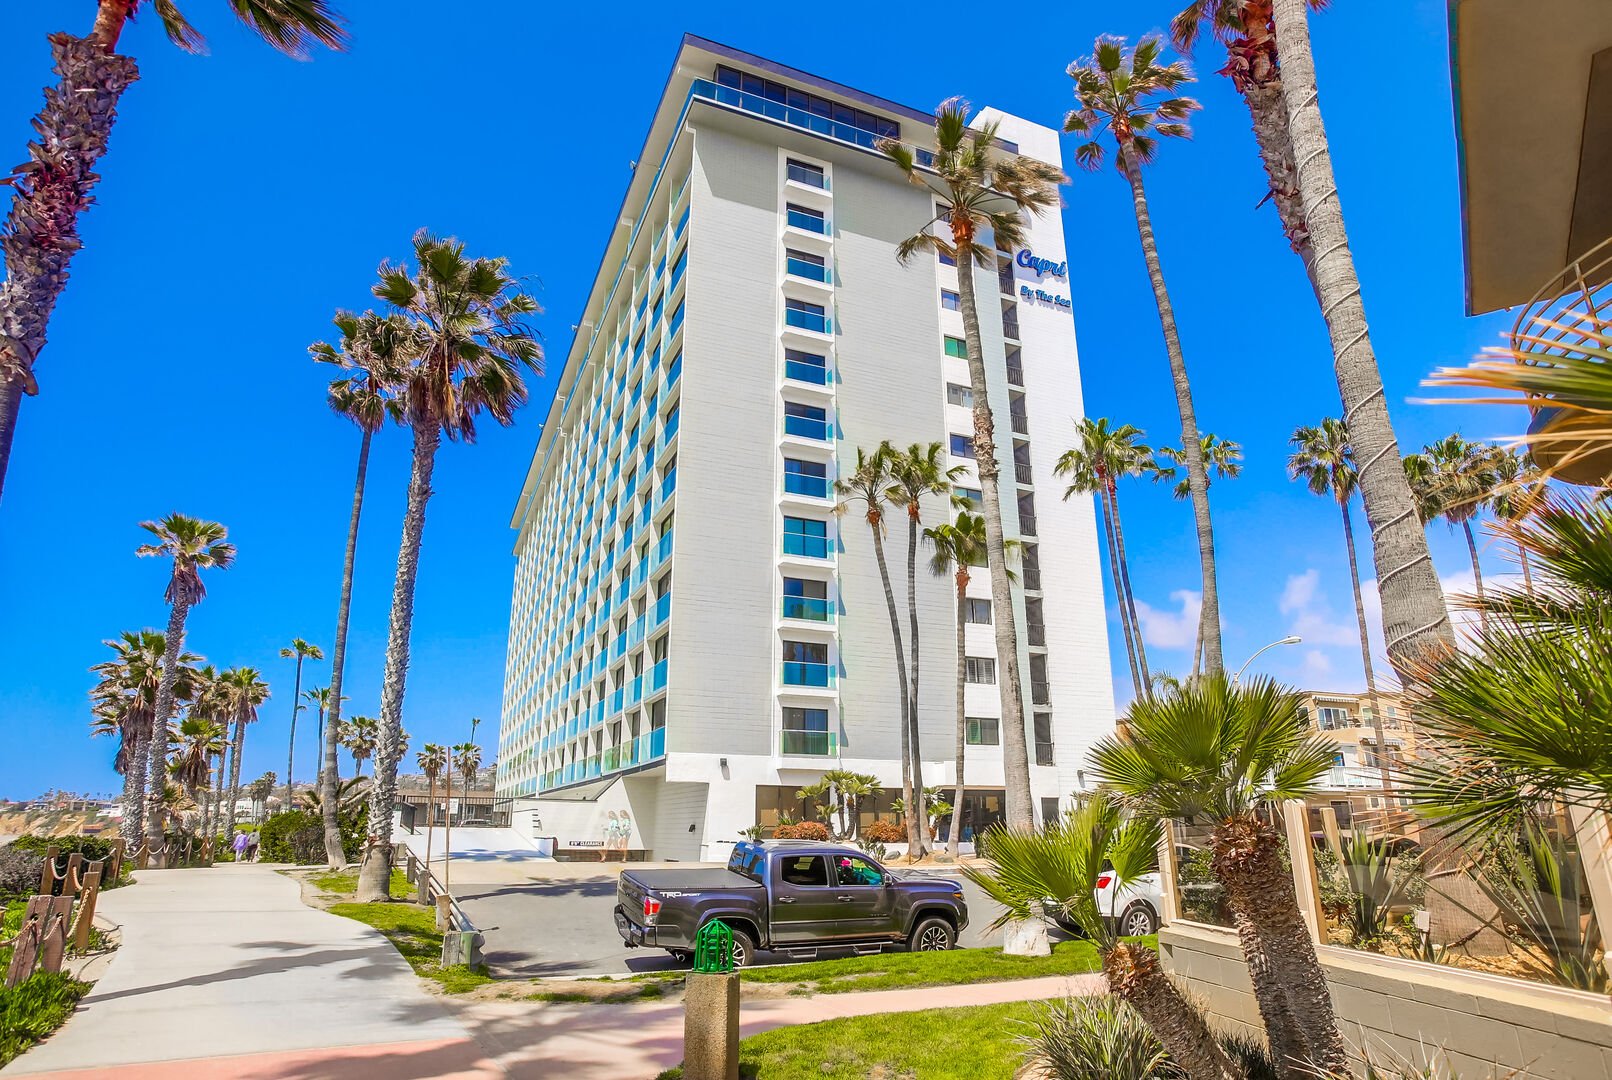 Capri by the Sea is the tallest high-rise building in PB!